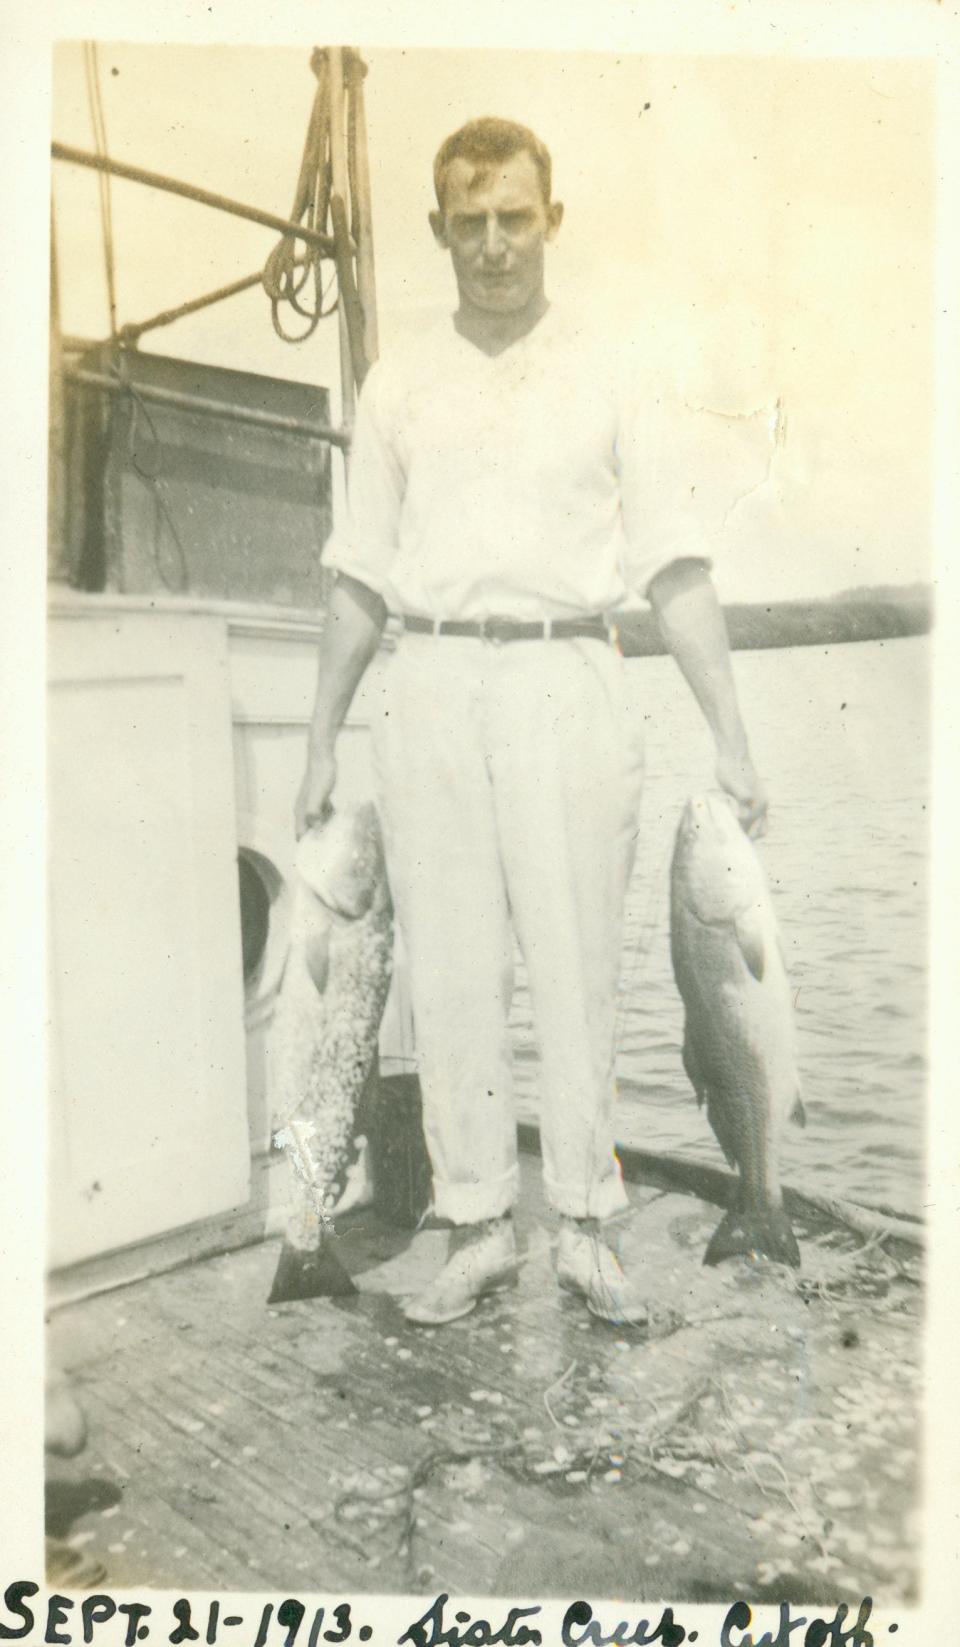 In 1913 an angler holds his catch at Sisters Creek as seen in Andrew Nicholas' book "Exploring the St. Johns River."